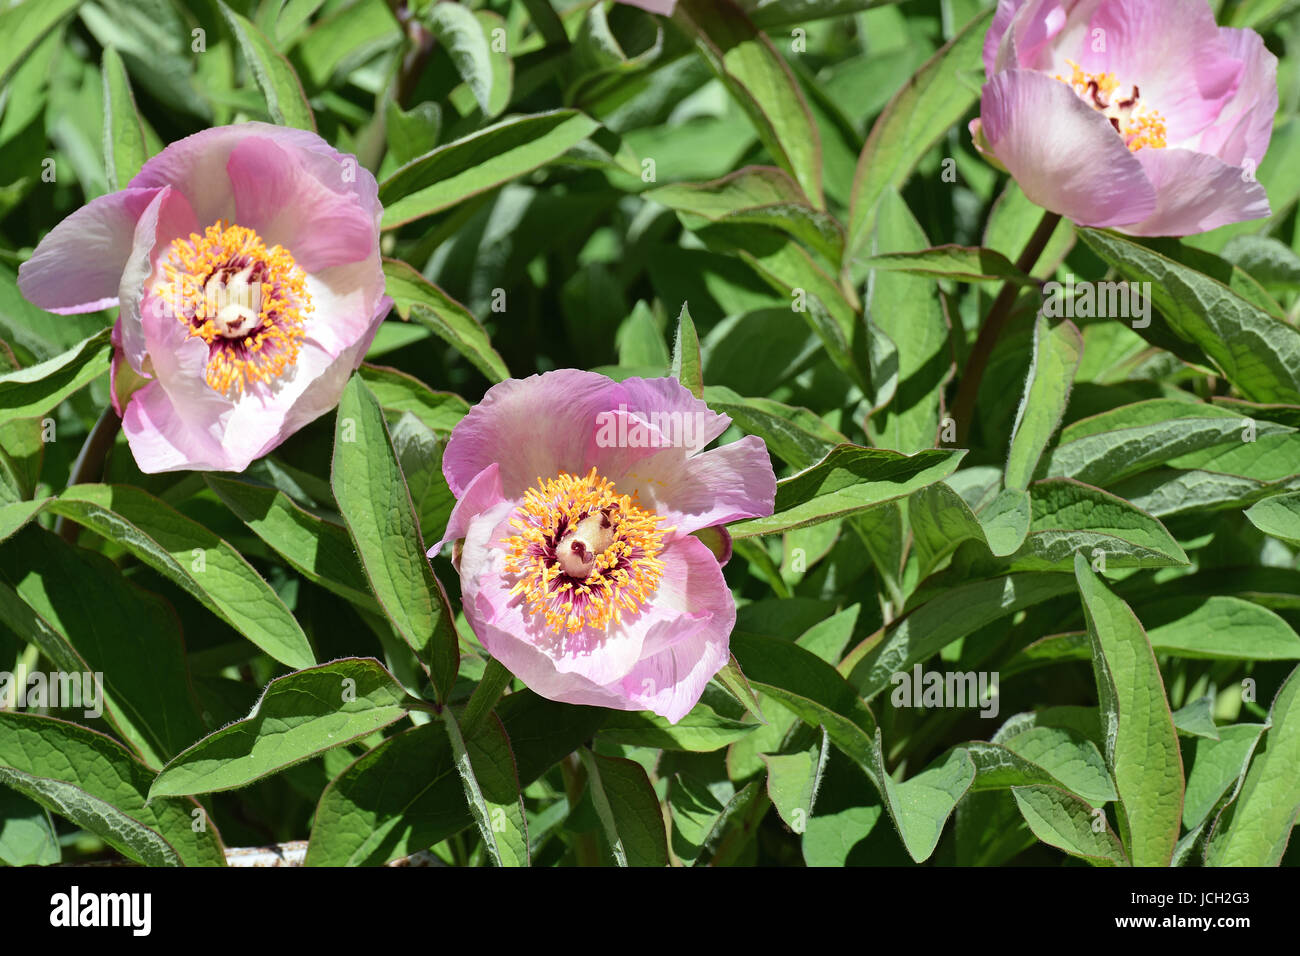 Paeonia lactiflora, also known as Chinese peony or common garden peony. Beautiful pink flowers between green leaves. Stock Photo